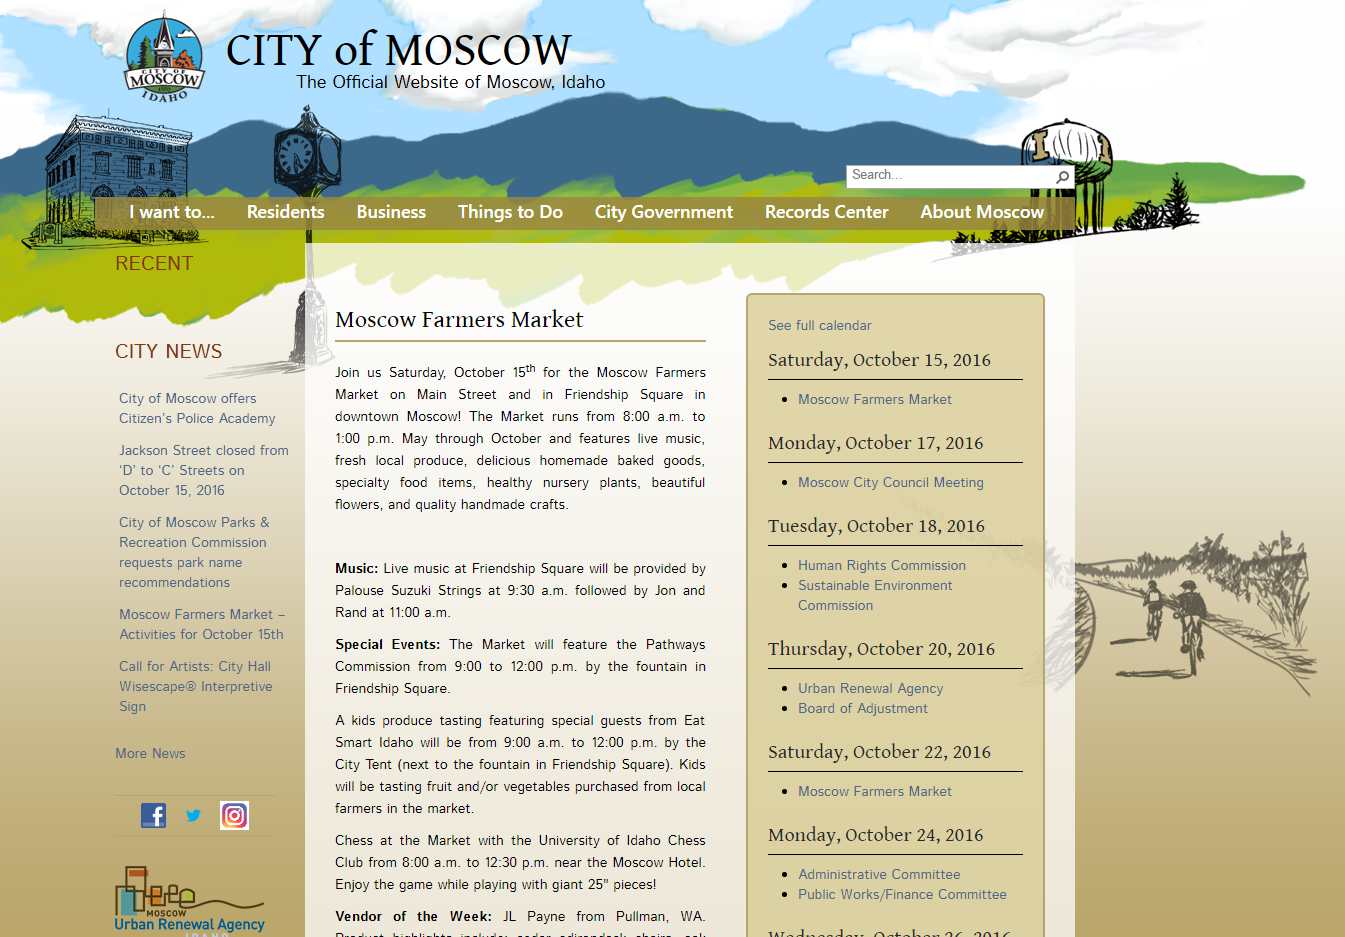 City of Moscow website graphics